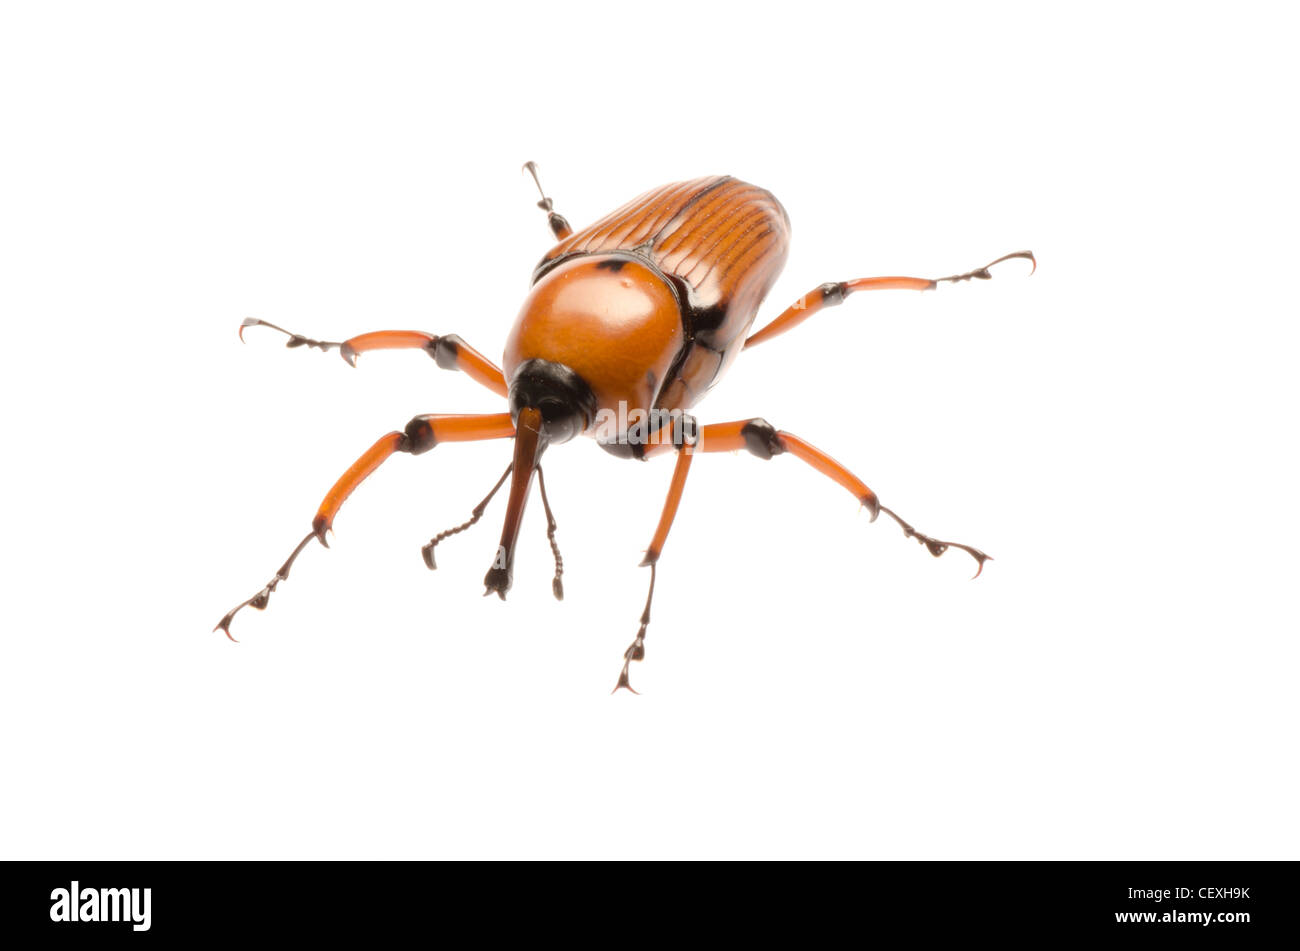 female brown palm weevil snout beetle, Rhynchophorus ferrugineus, isolated on white Stock Photo